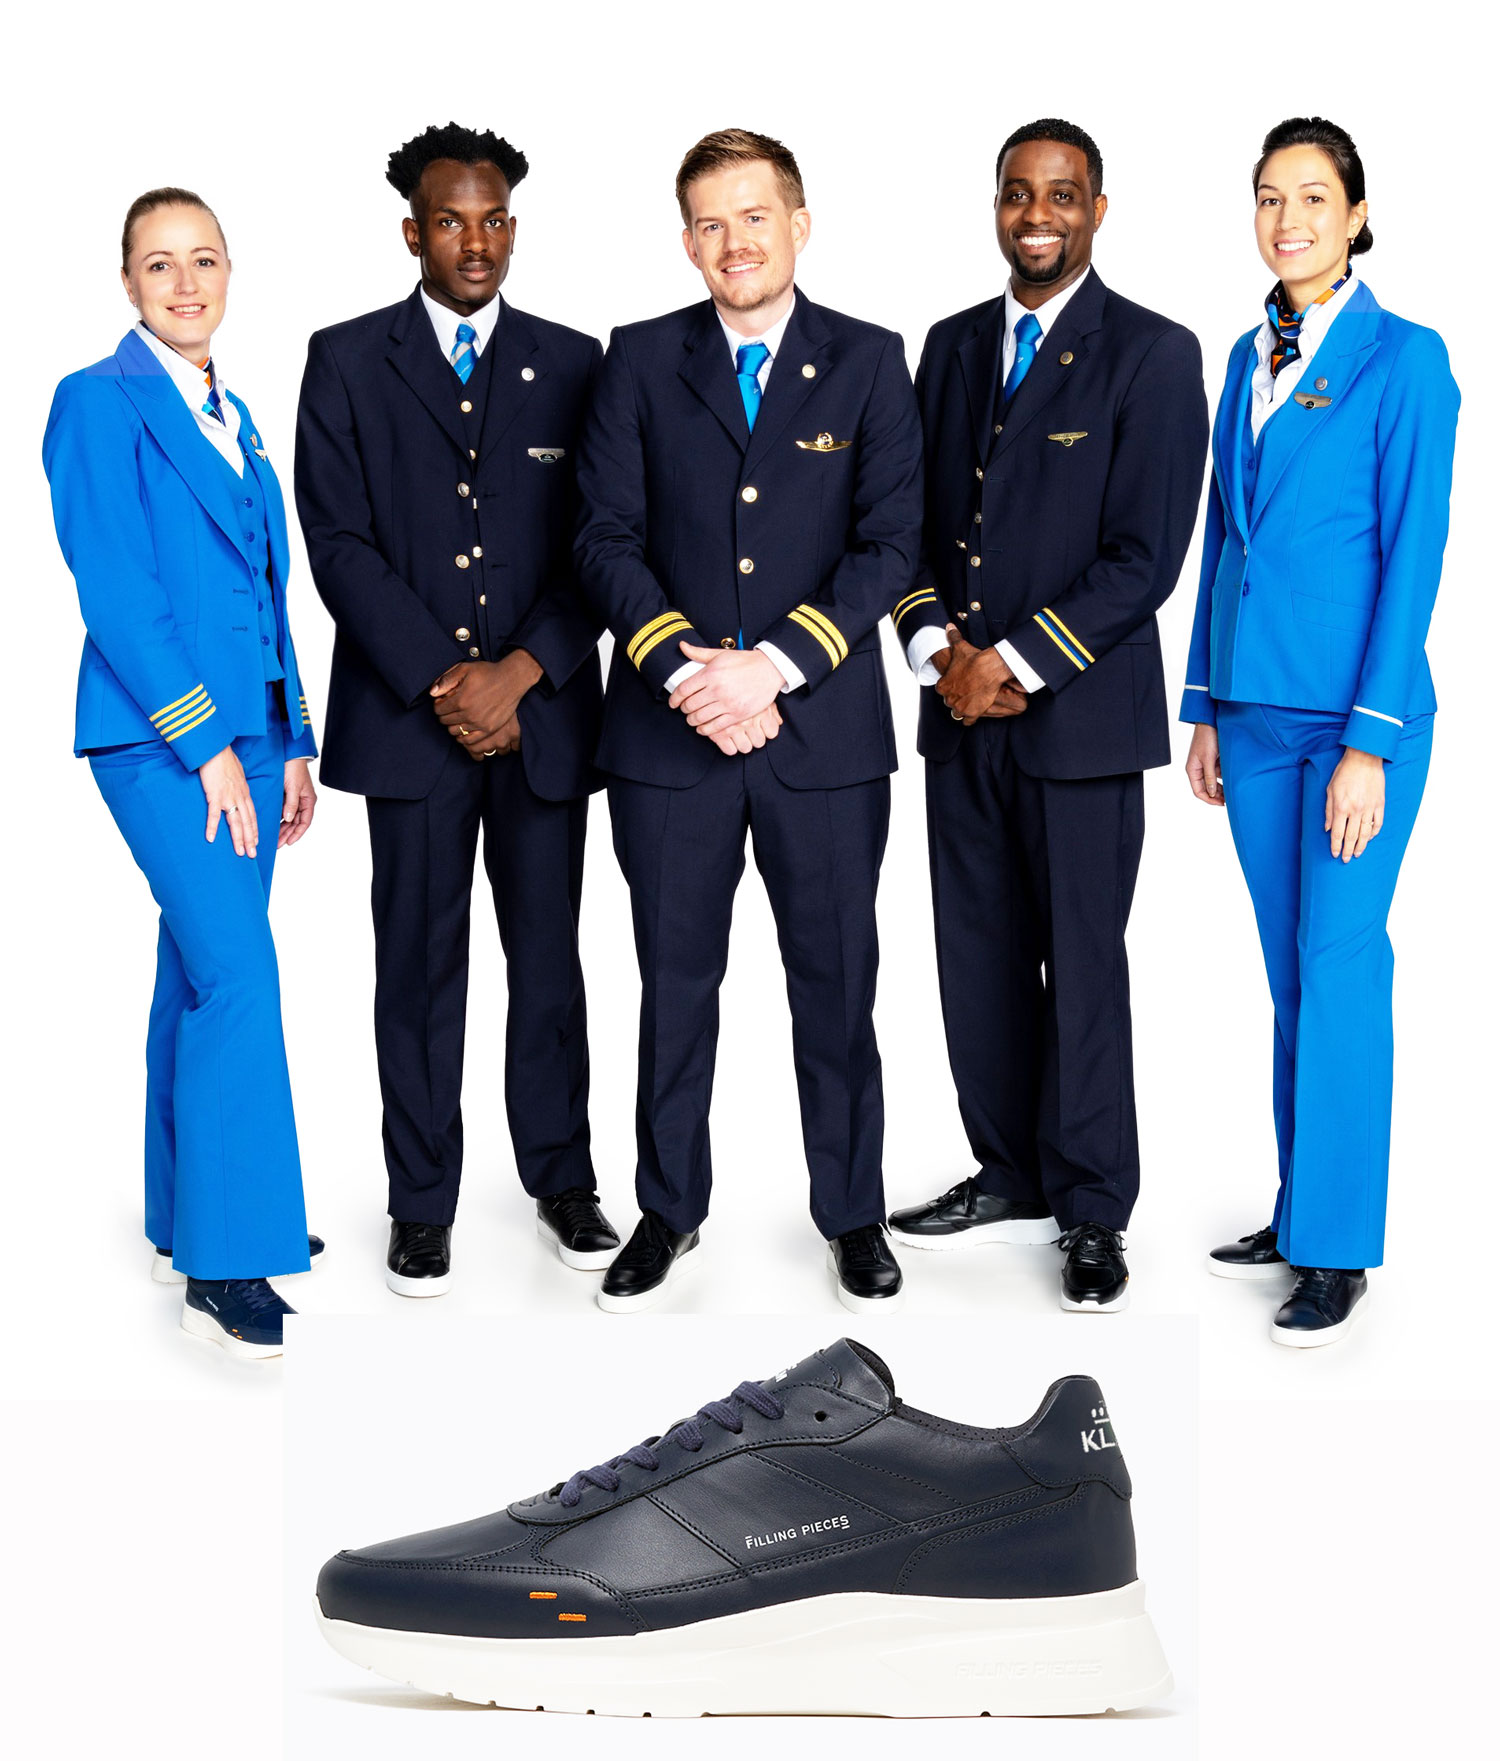 KLM will allow Cabin Crew to wear sneakers